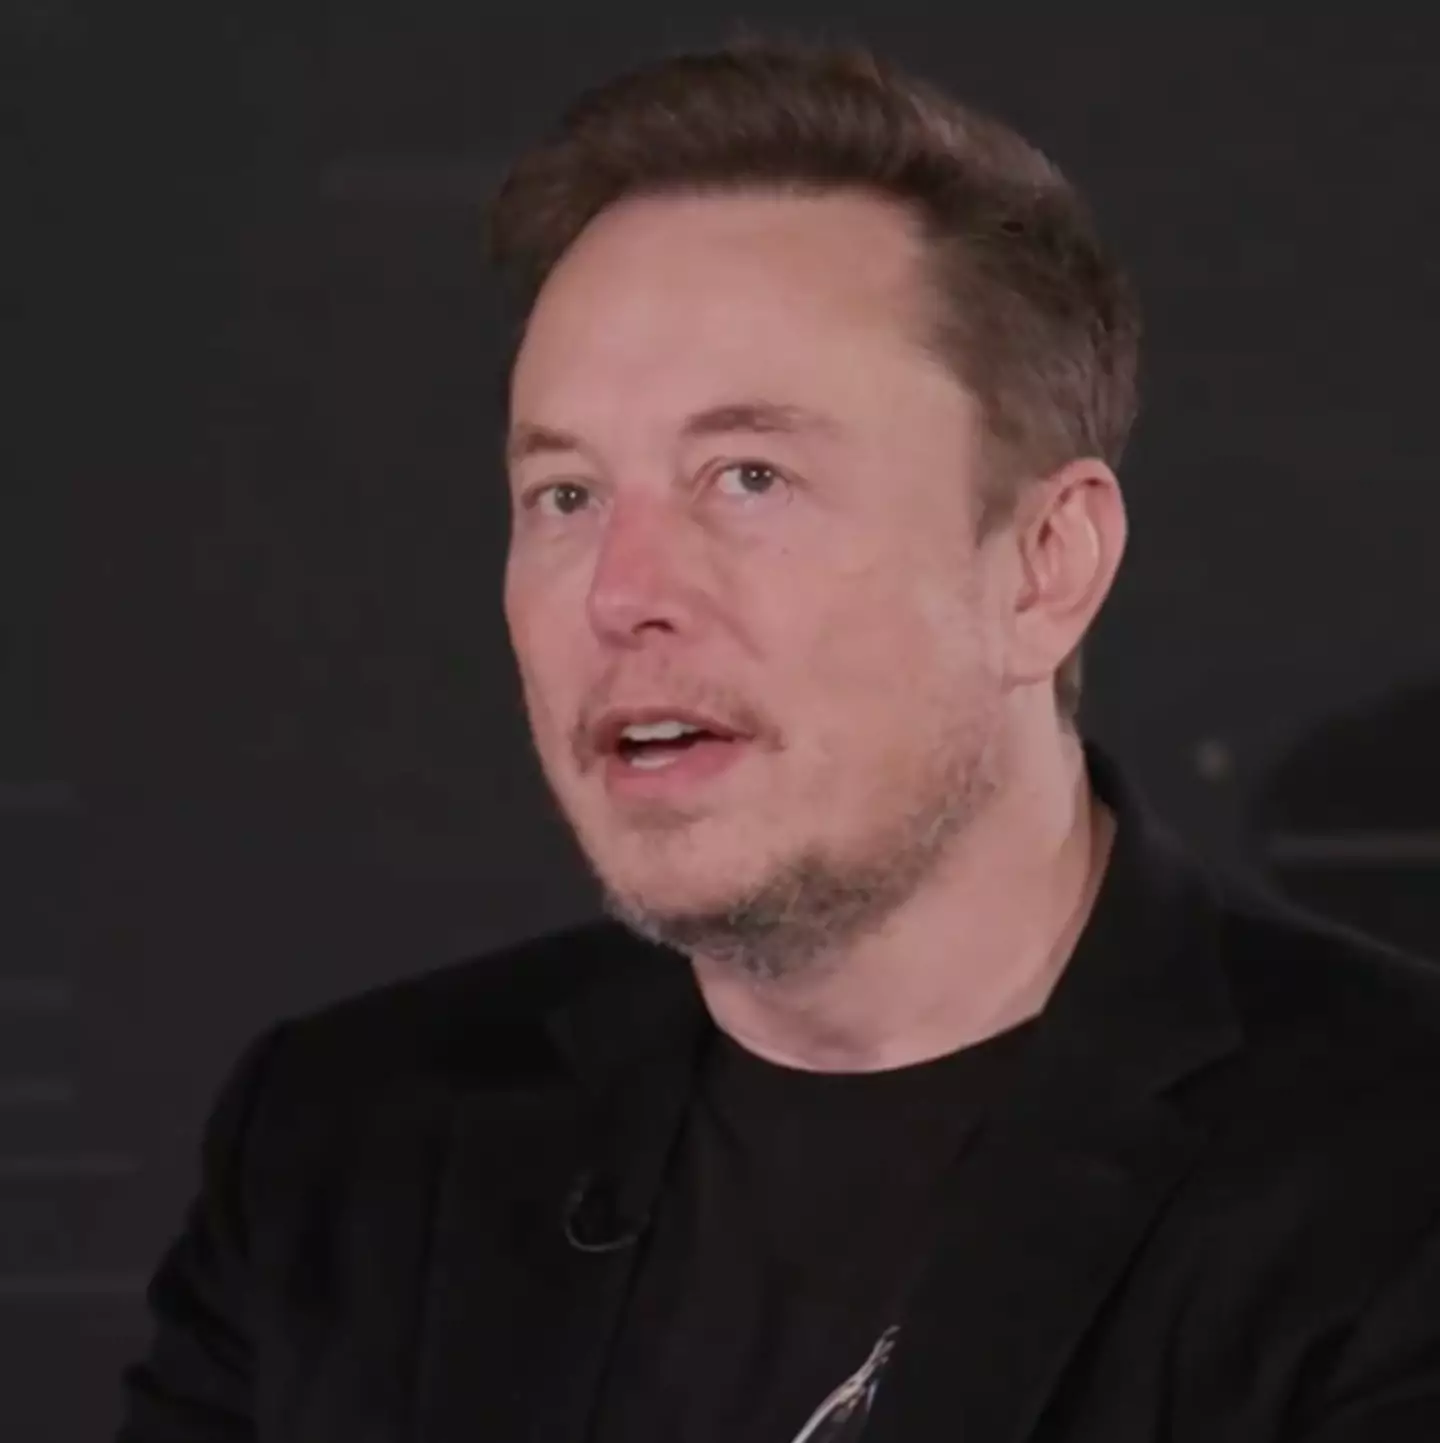 Elon Musk has suggested AI may wipe out jobs.